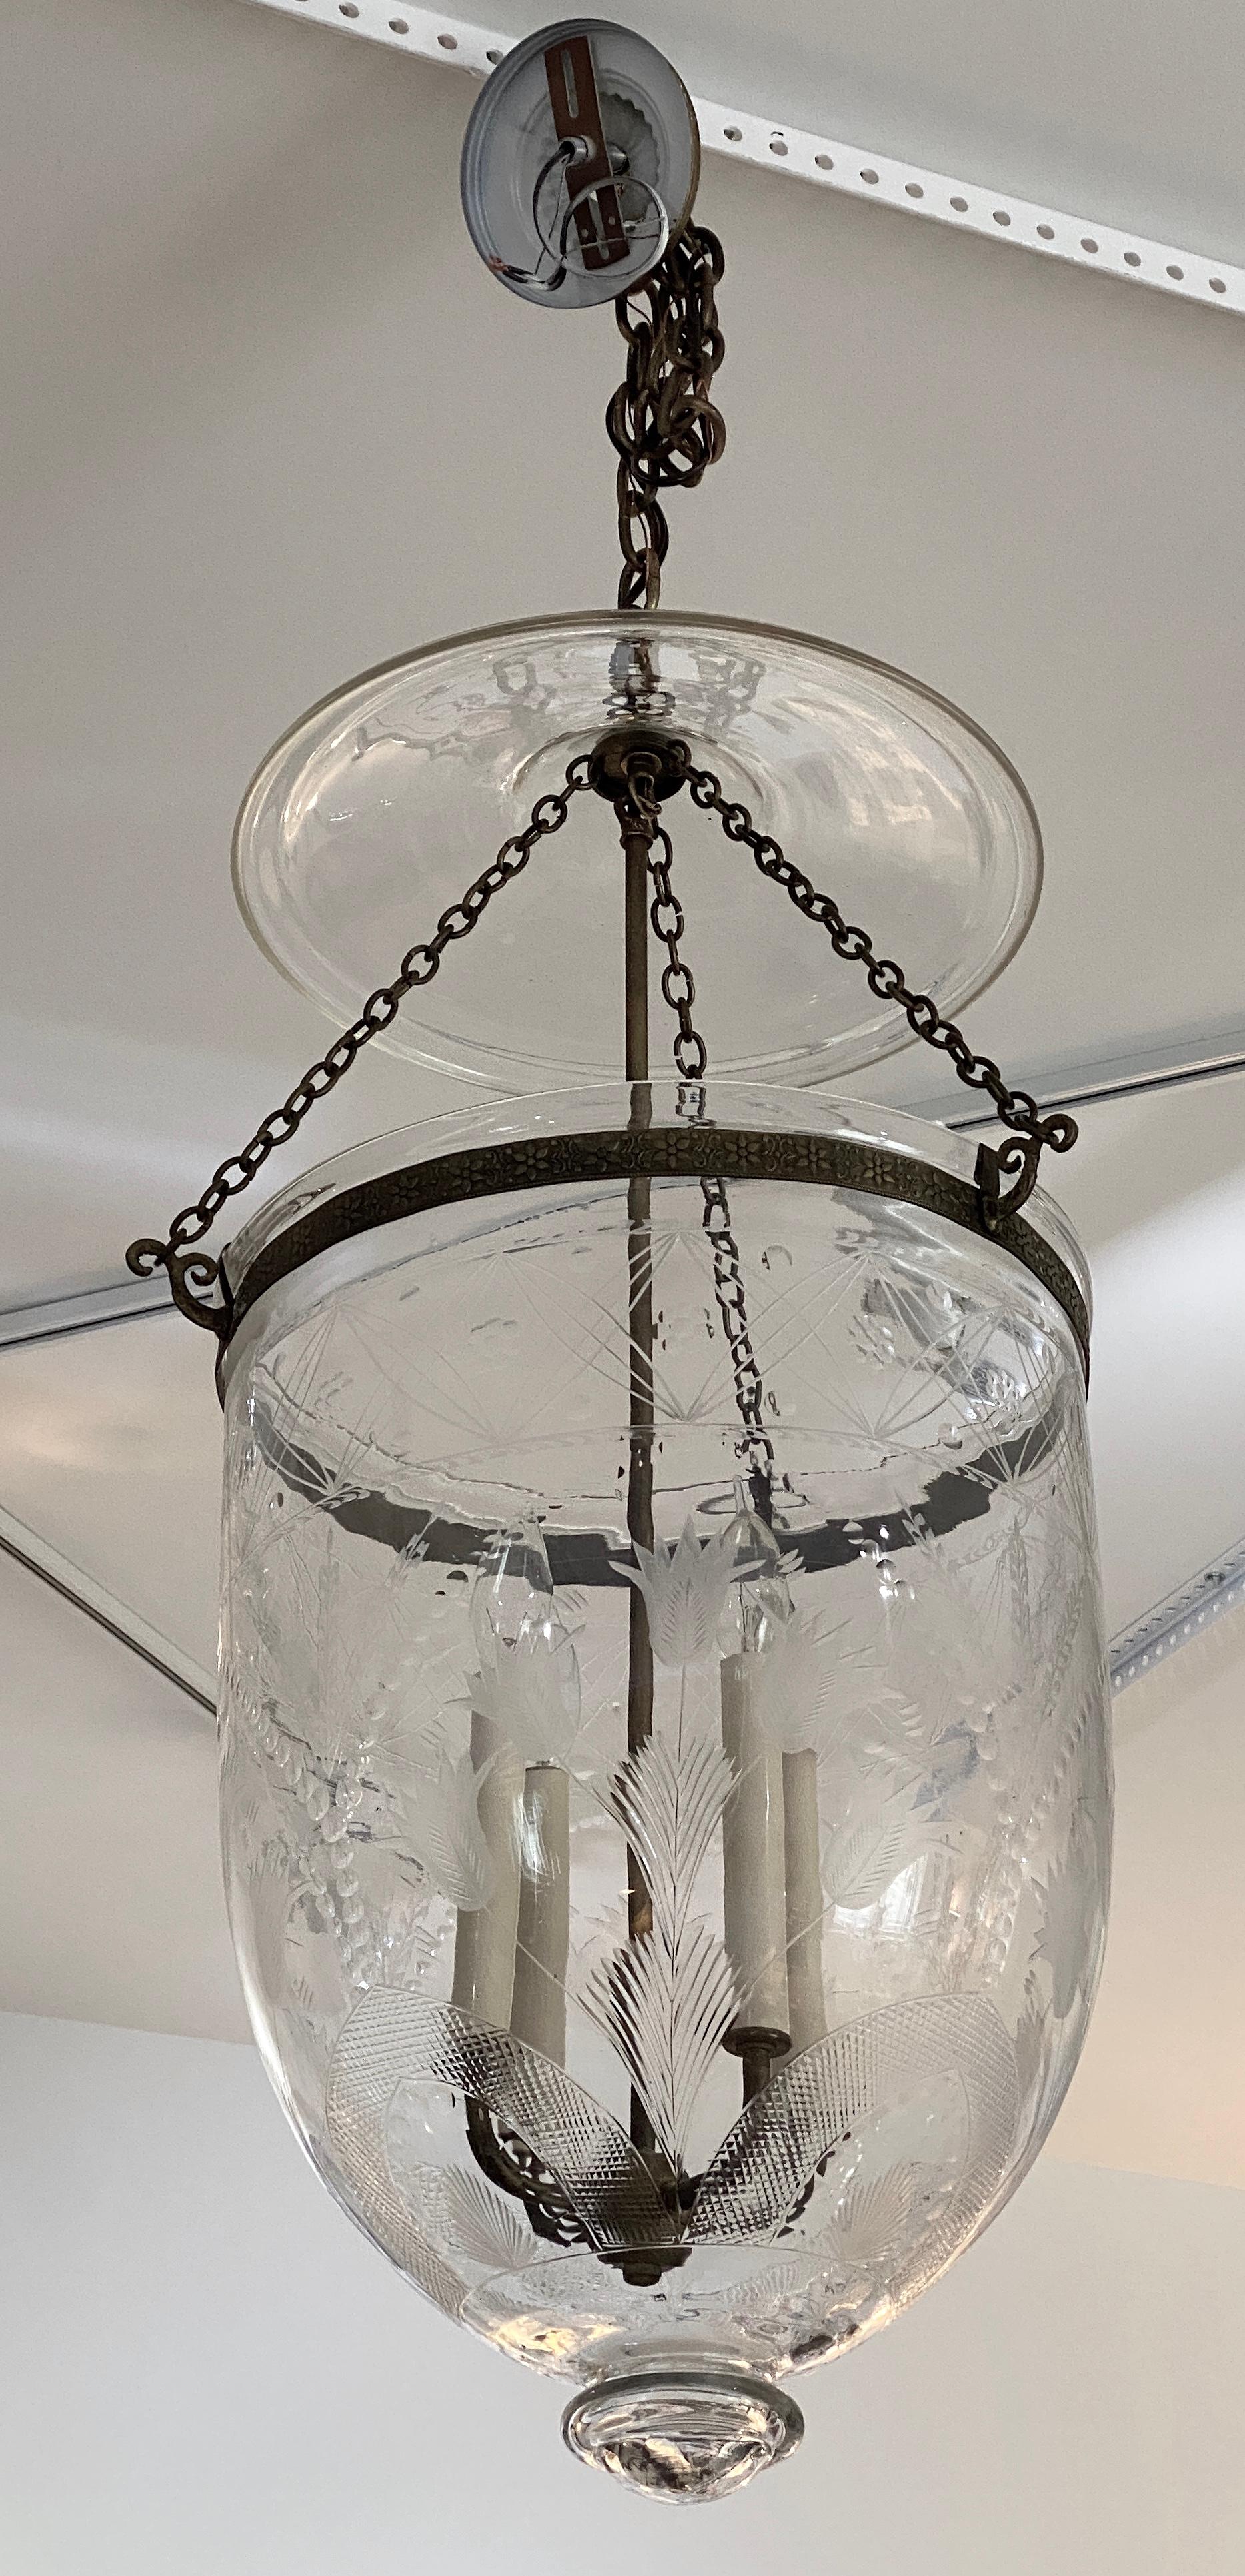 Large scale Anglo-Indian Hundai Bell Jar Lantern, hand engraved and crafted by artisans, acquired from a Palm Beach estate.

Note: Requires 4 chandelier bulbs.

Note: The overall drop including the bell jar, chain and ceiling canopy is approximately